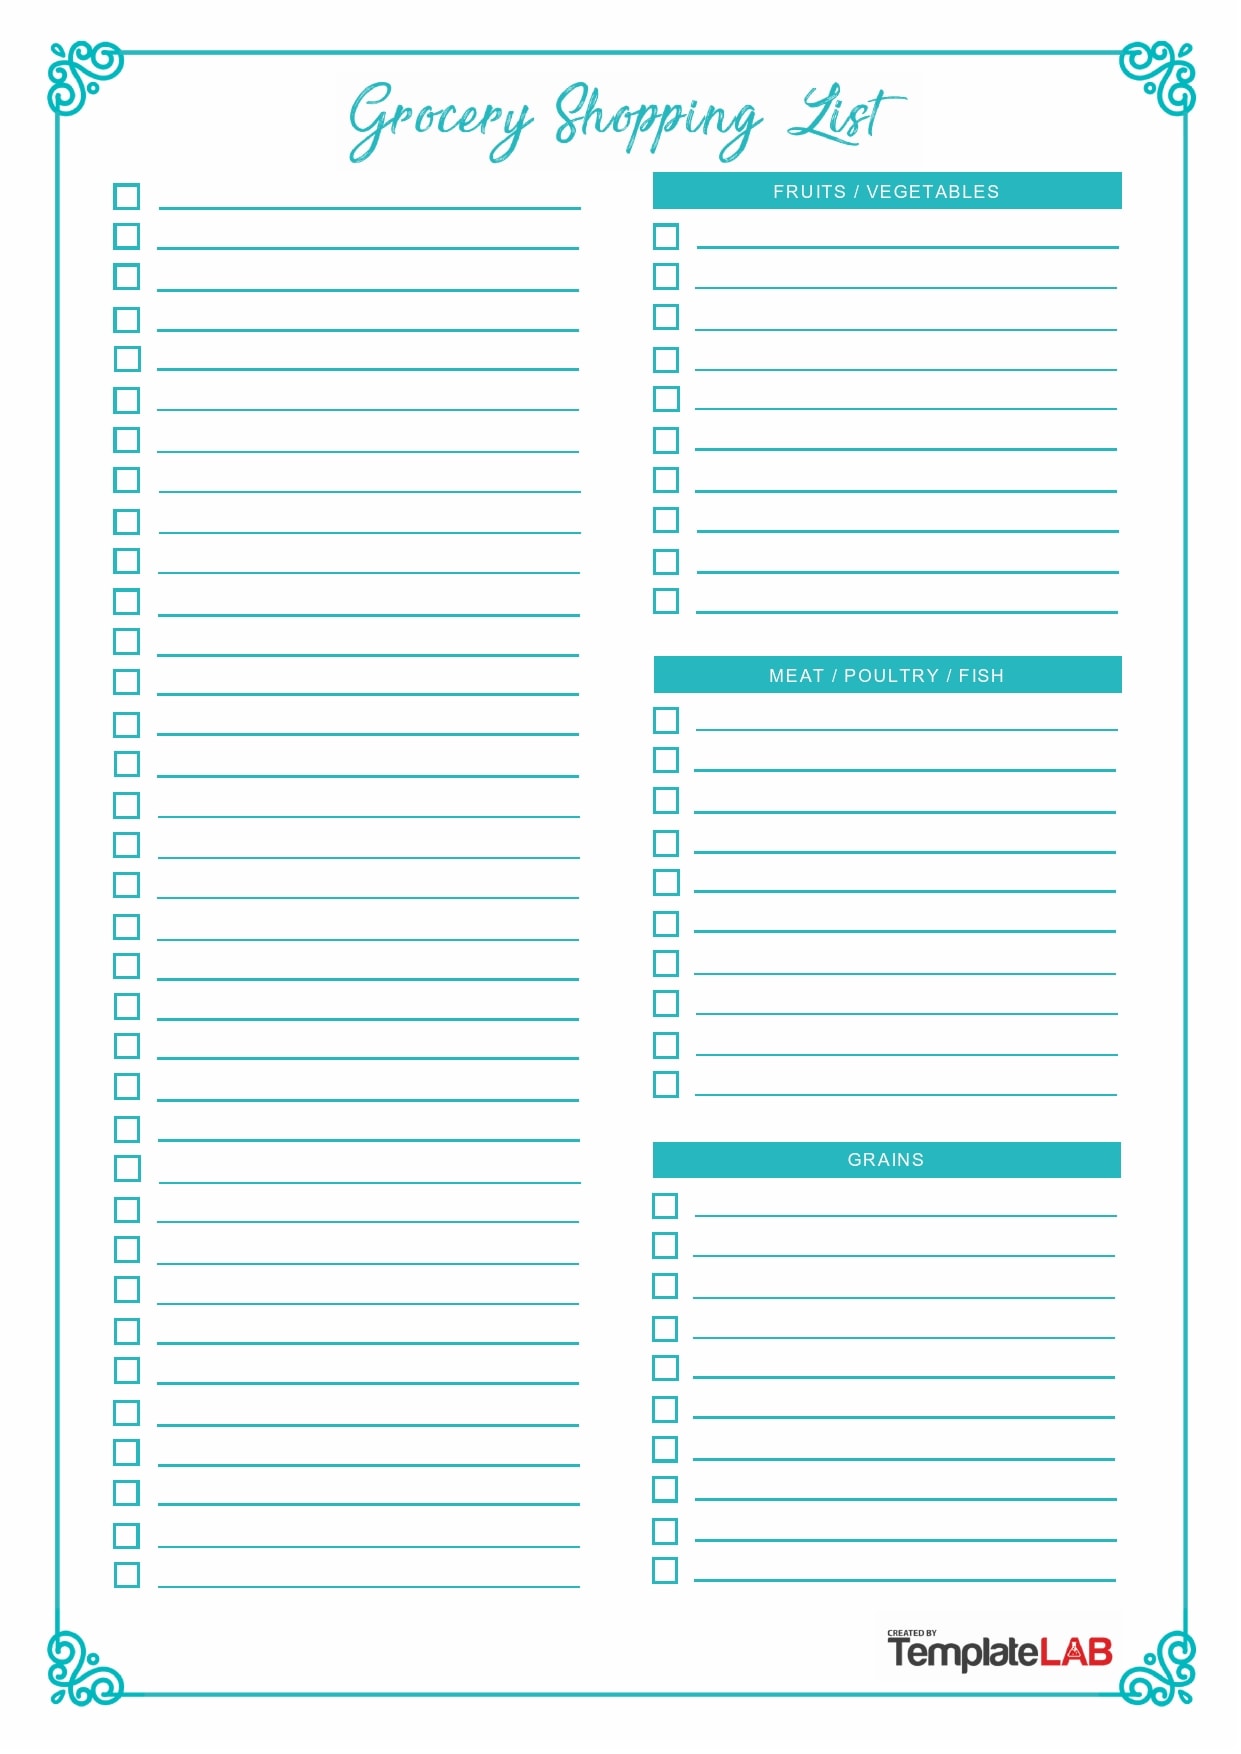 heb-grocery-list-template